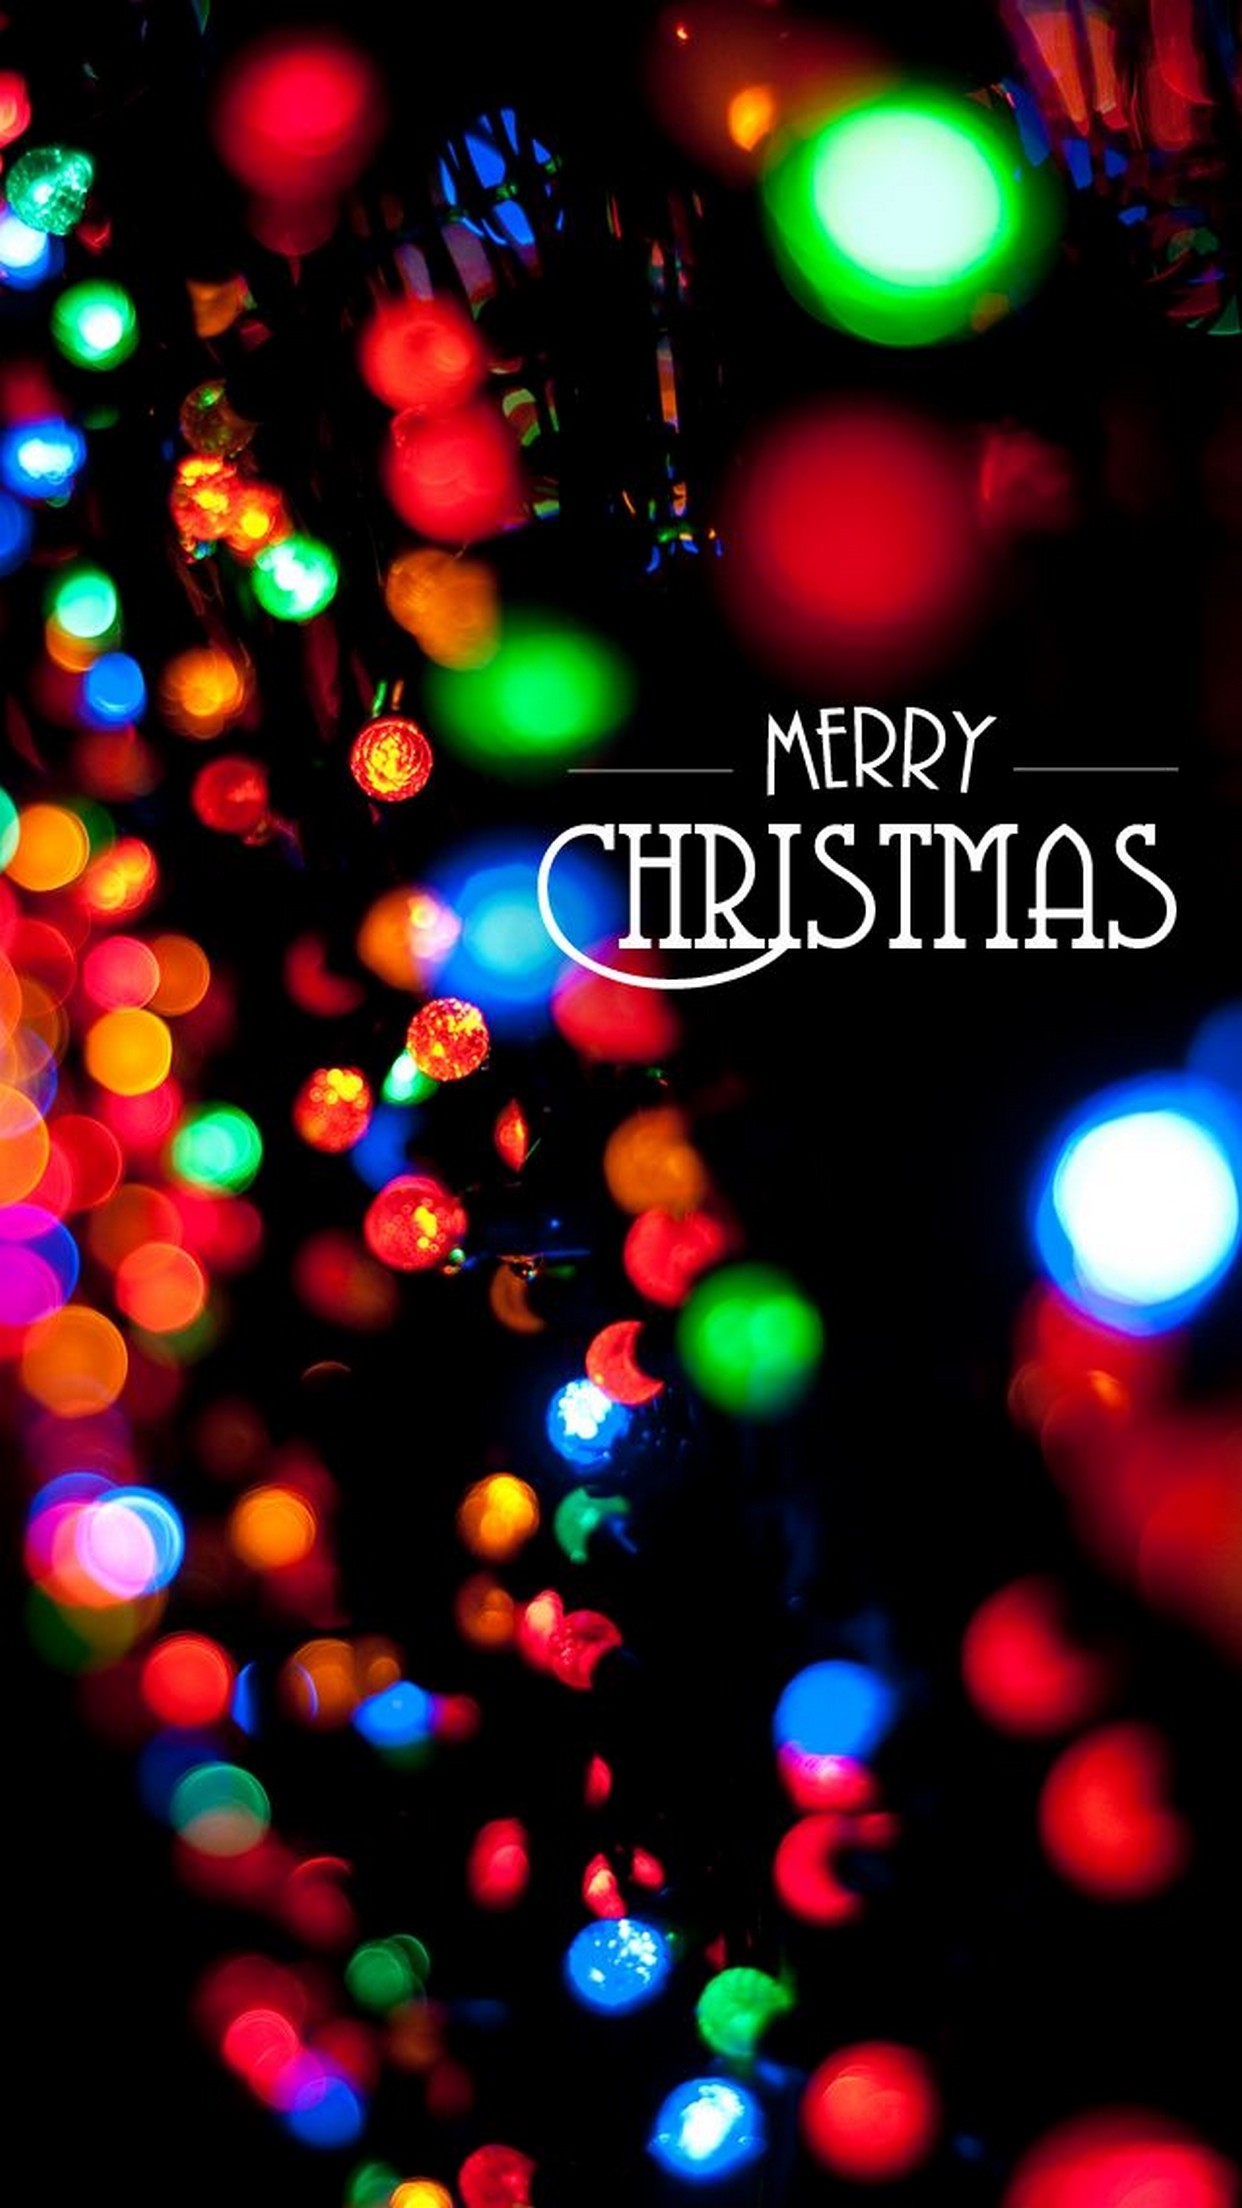 Christmas phone wallpaper ·① Download free beautiful wallpapers for